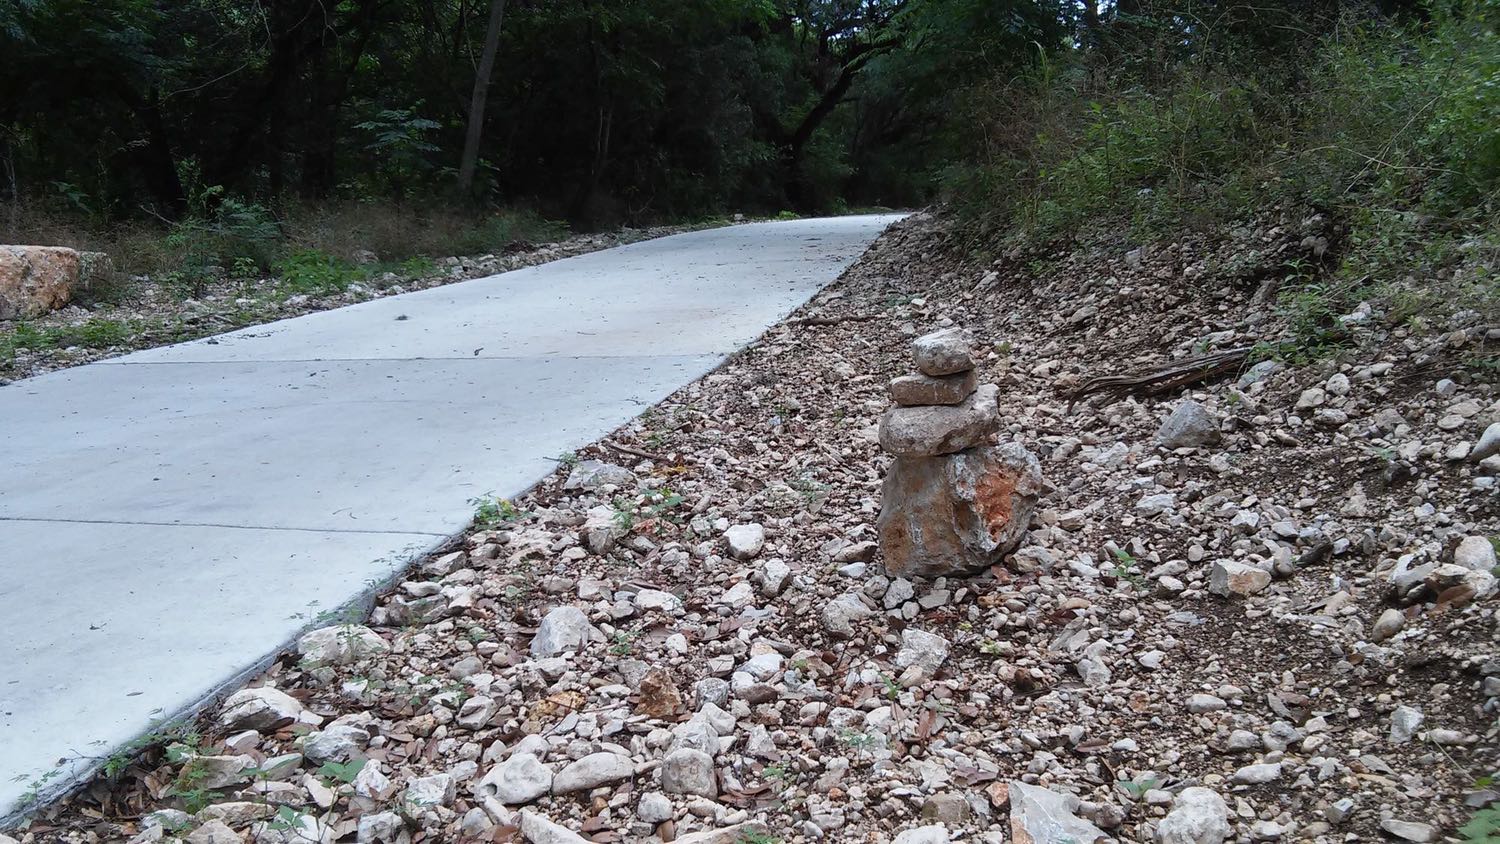 A rock statute greets those on the trails